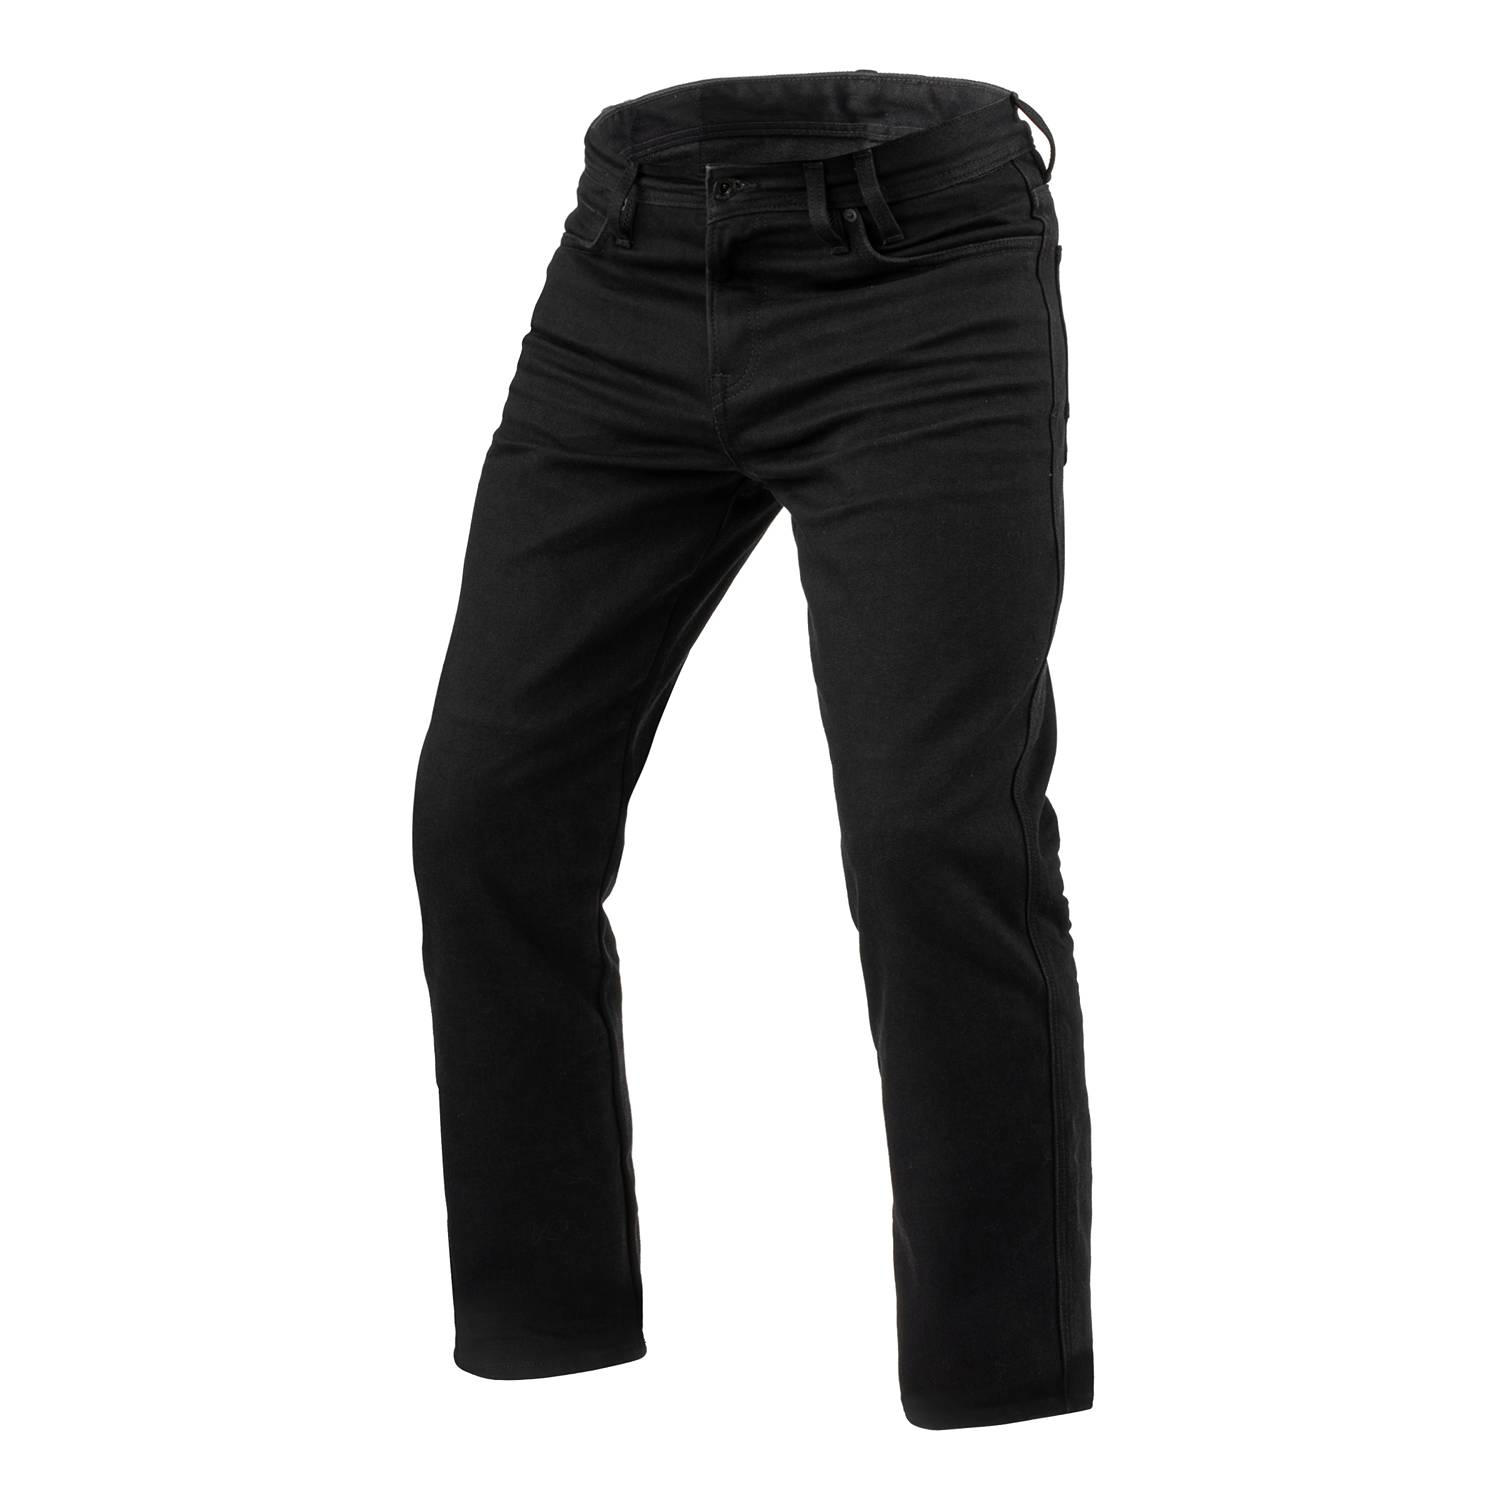 Image of EU REV'IT! Jeans Lombard 3 RF Black L36 Motorcycle Jeans Taille L36/W38